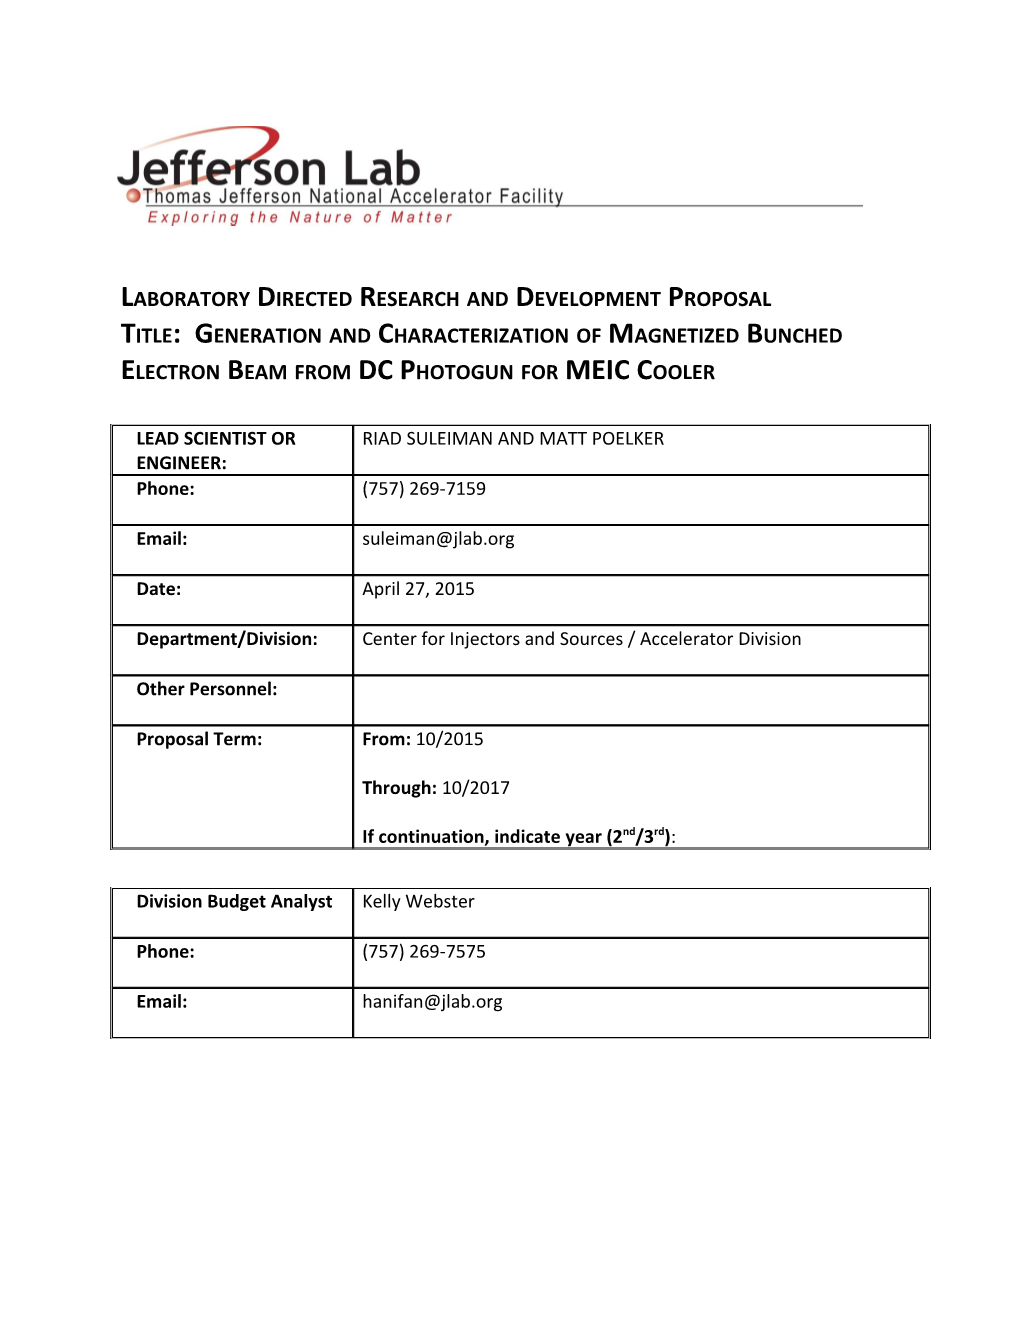 Laboratory Directed Research and Development Proposal Title: Generation and Characterization